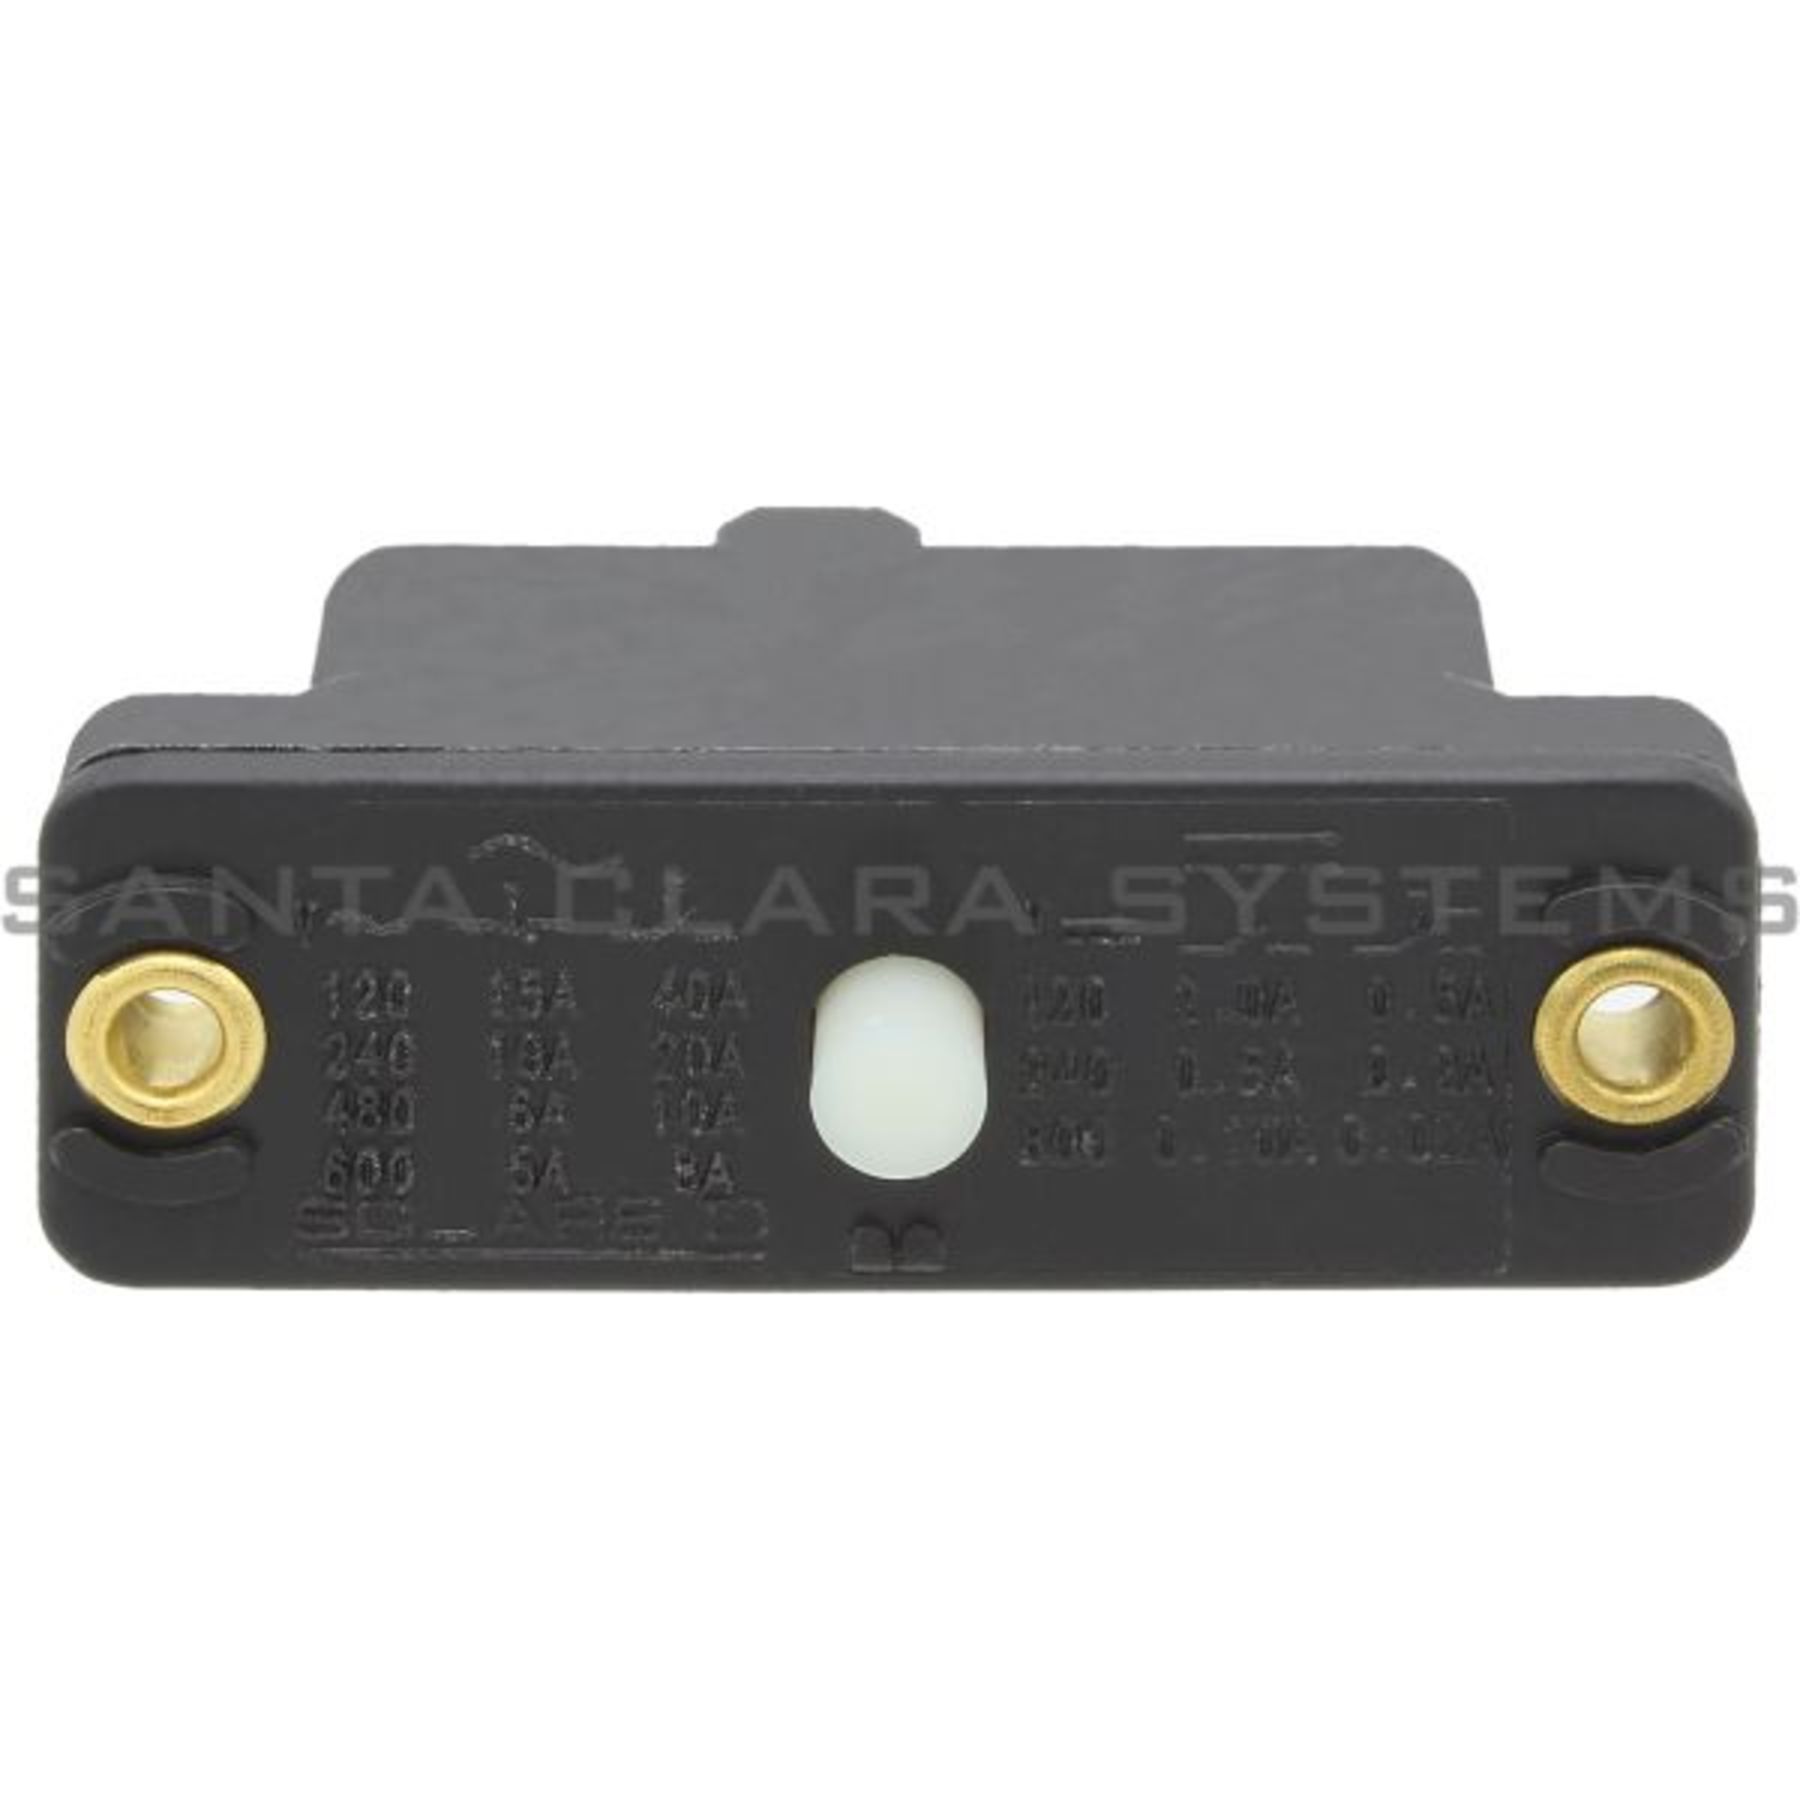 SQUARE D 9007AO2 Industrial Swch,15A,1 NO,1 NC,Button 